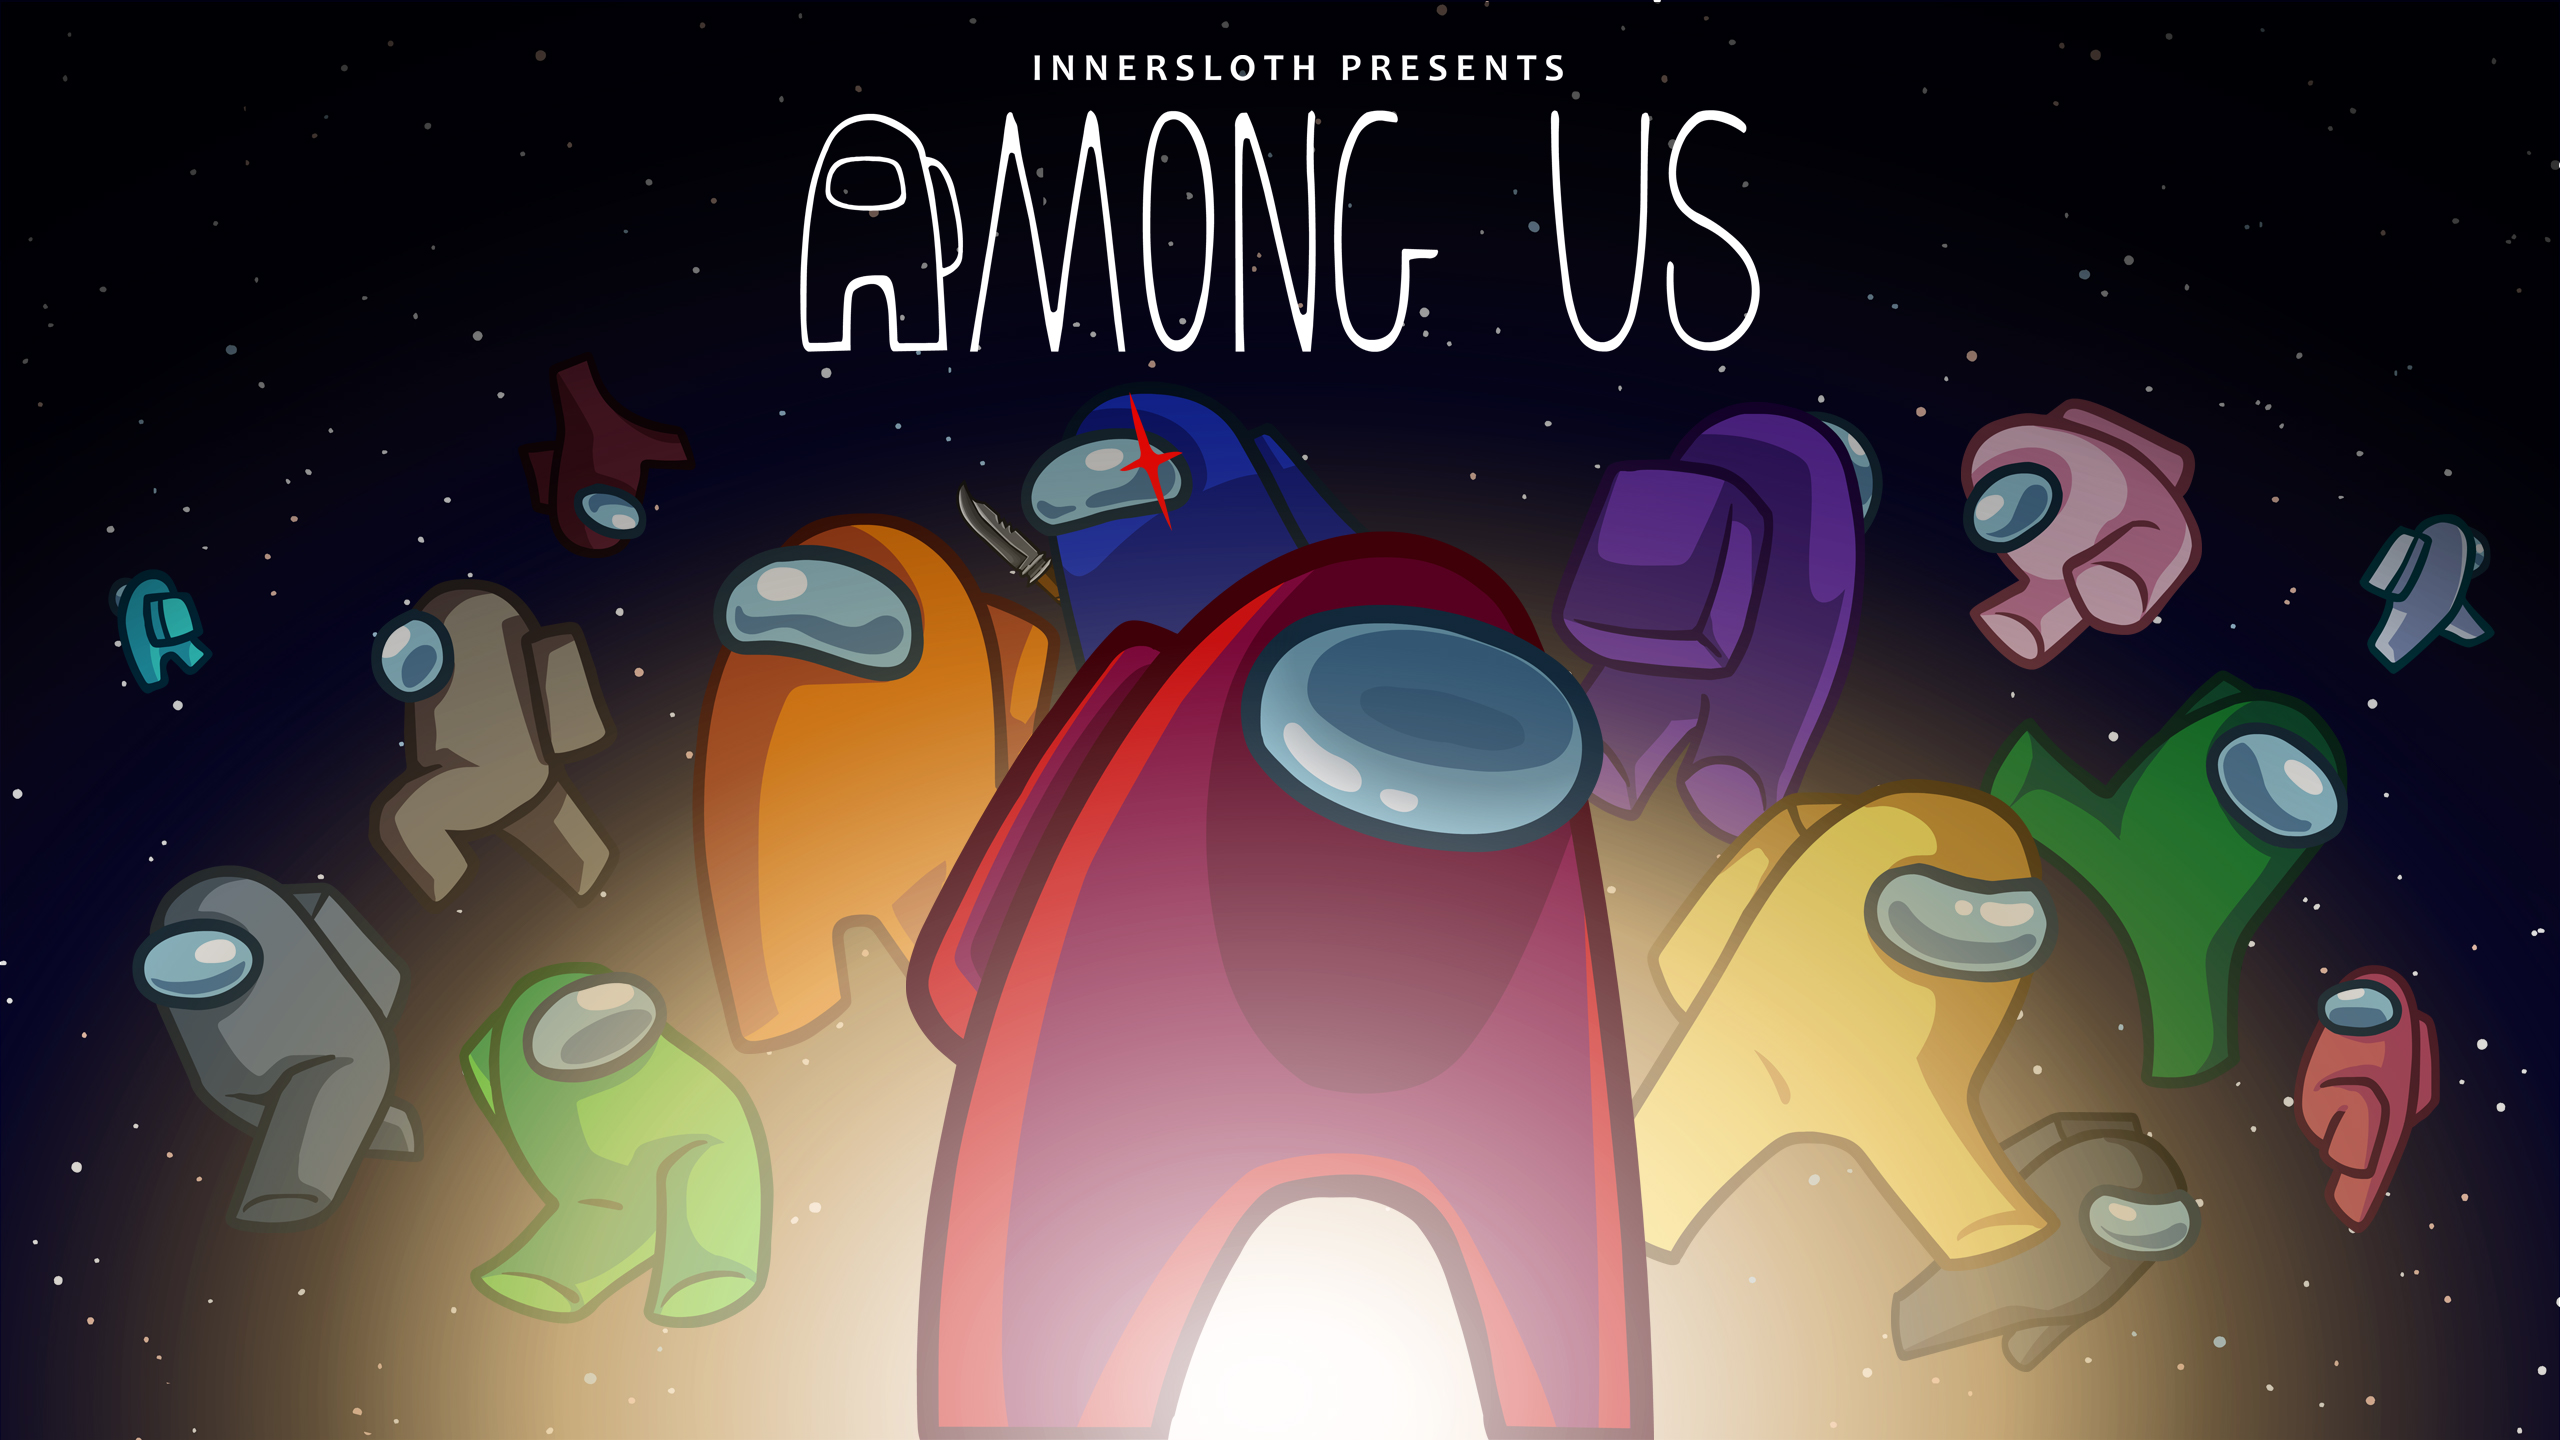 New Among Us VR Trailer and Discord Server!